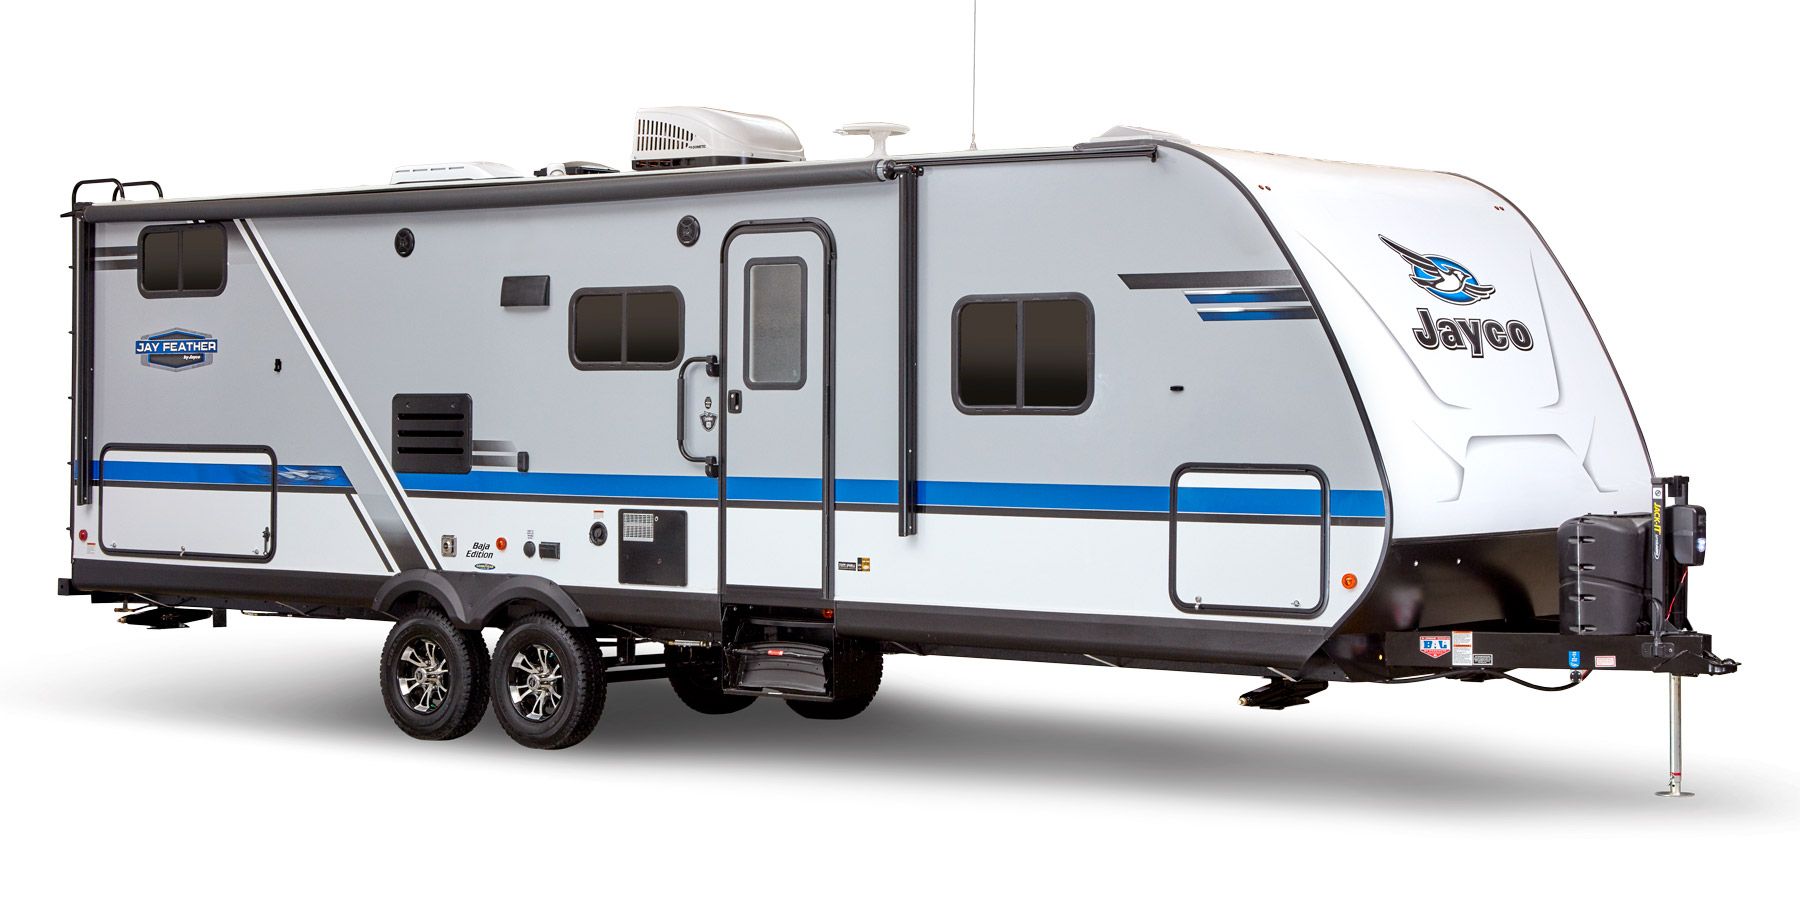 Jayco Jay Feather 2019 feature image